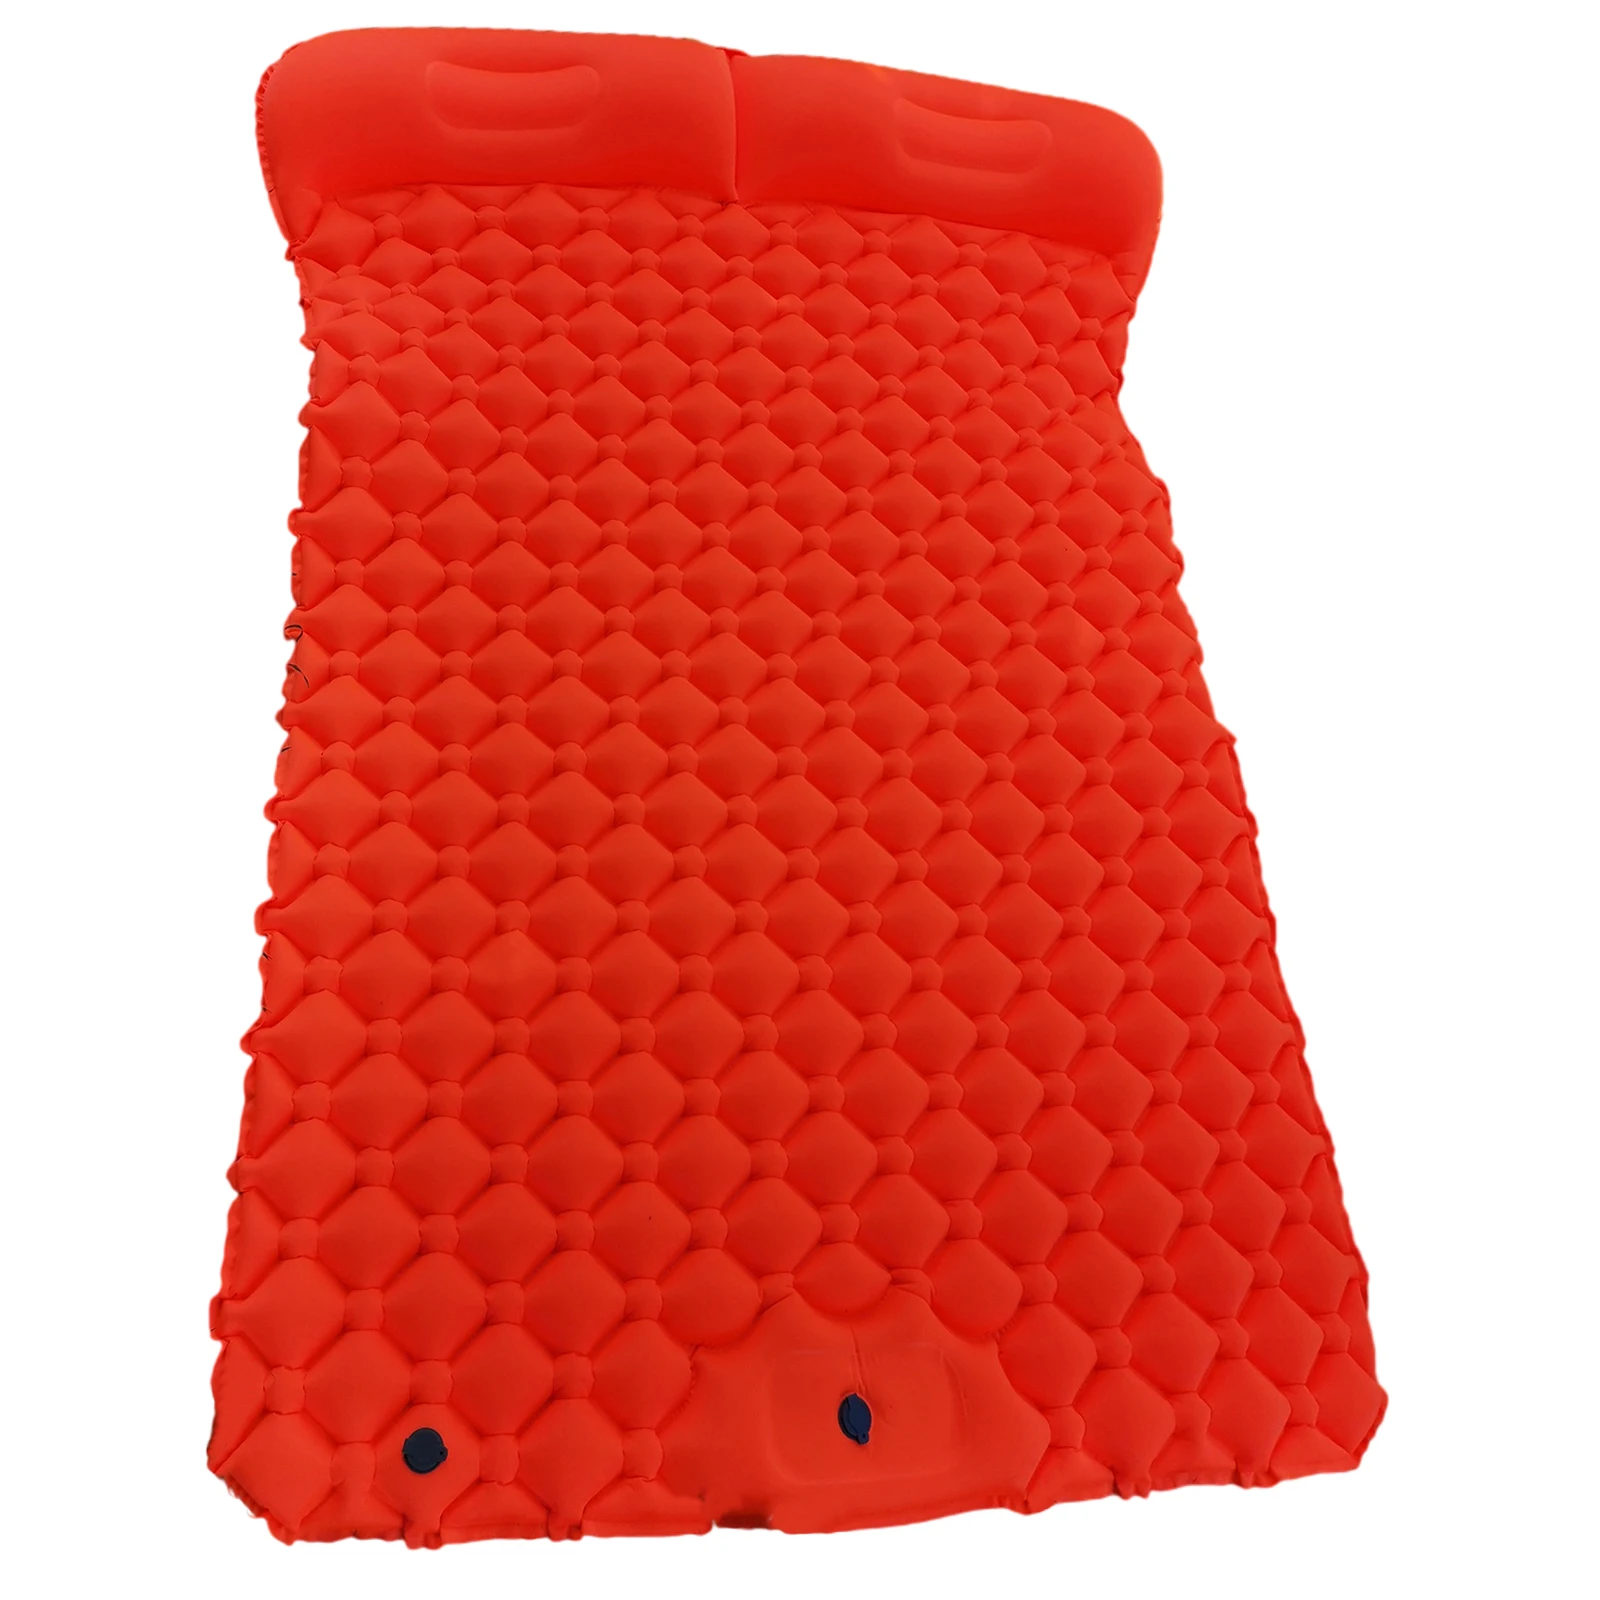 Double Sleeping Pad Travel Camping Inflatable Air Mattress With Pillow Inflating Roll Mat Compact Ultralight Sleep Mat